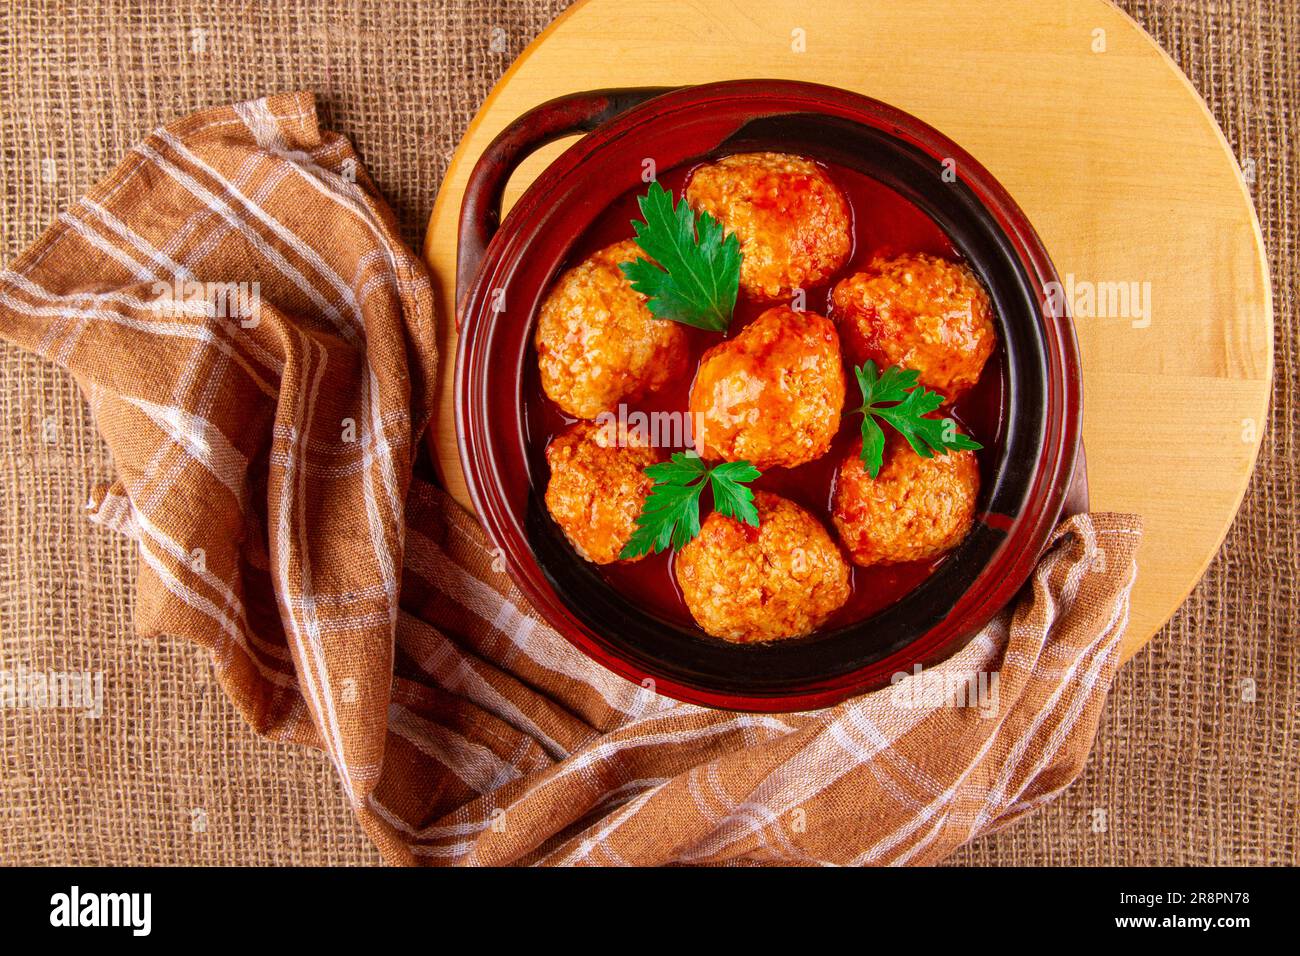 Clay pan with freshly-made kottbullar meatballs in red sauce Stock Photo